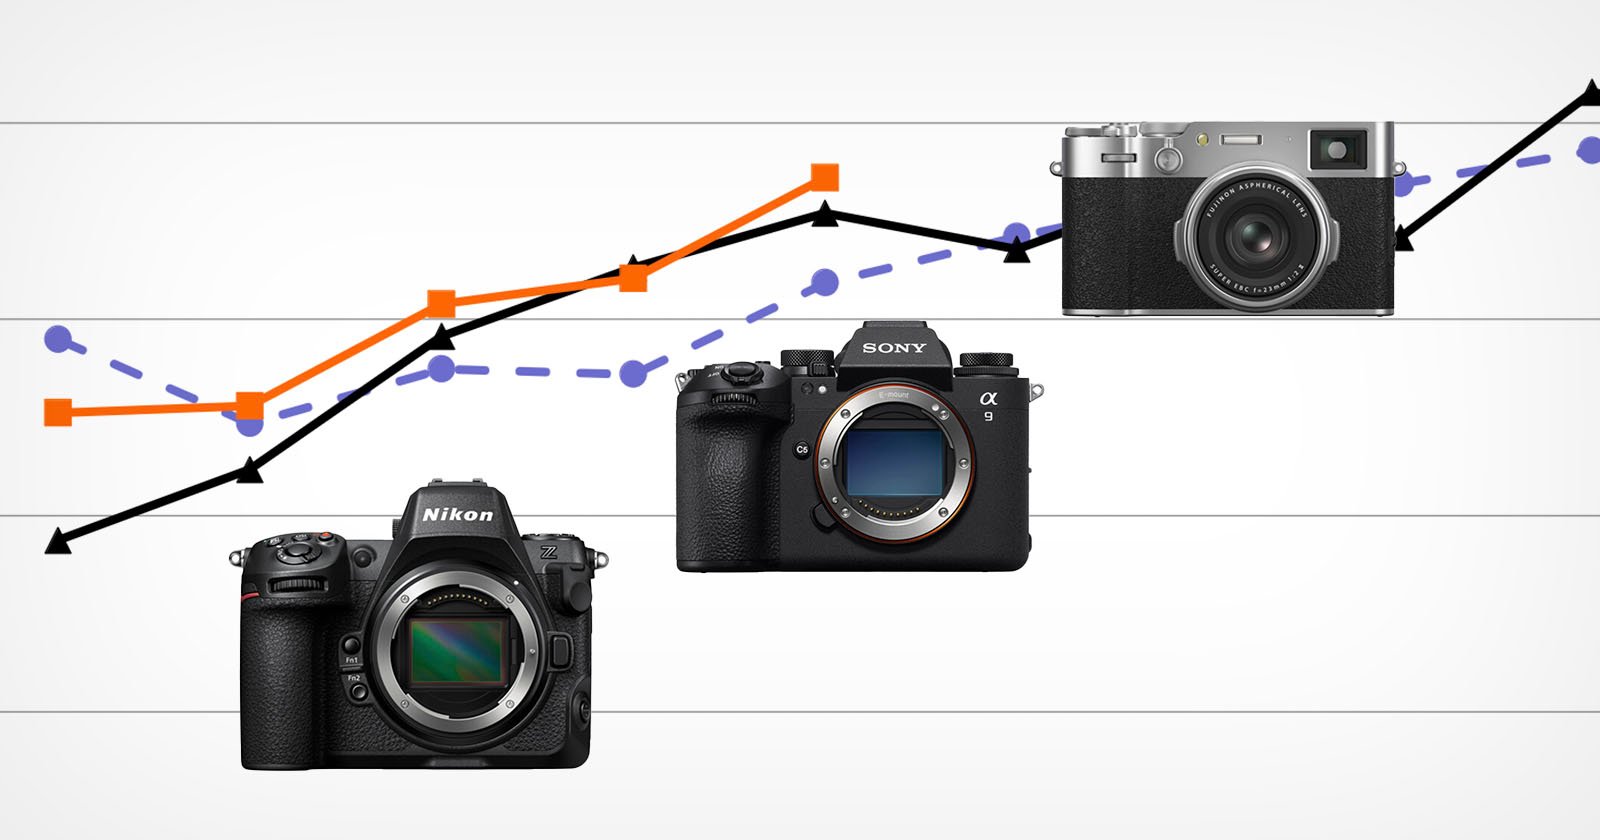 A comparative chart displaying the performance trends of three camera brands: Nikon, Sony, and Fujifilm. Each camera brand is represented by images placed on different points of two graph lines, illustrating varying data over time.